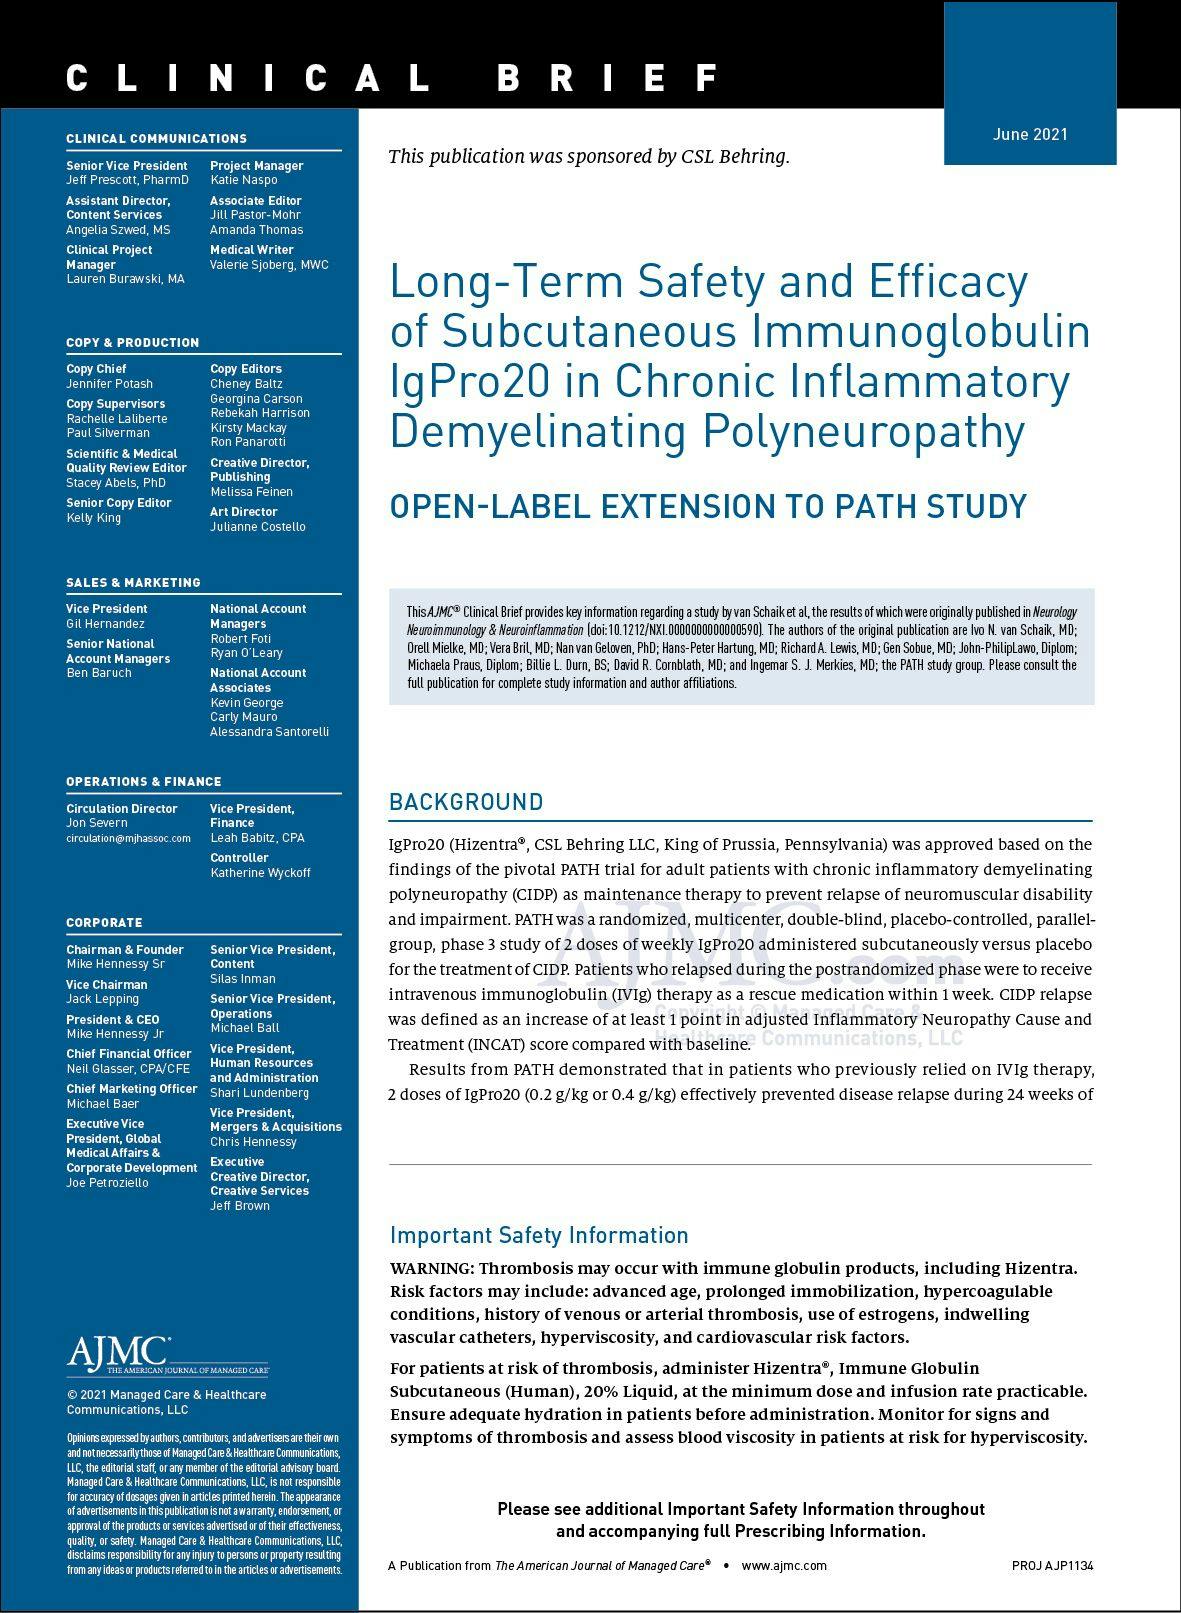 Long-Term Safety and Efficacy of Subcutaneous Immunoglobulin IgPro20 in Chronic Inflammatory Demyelinating Polyneuropathy